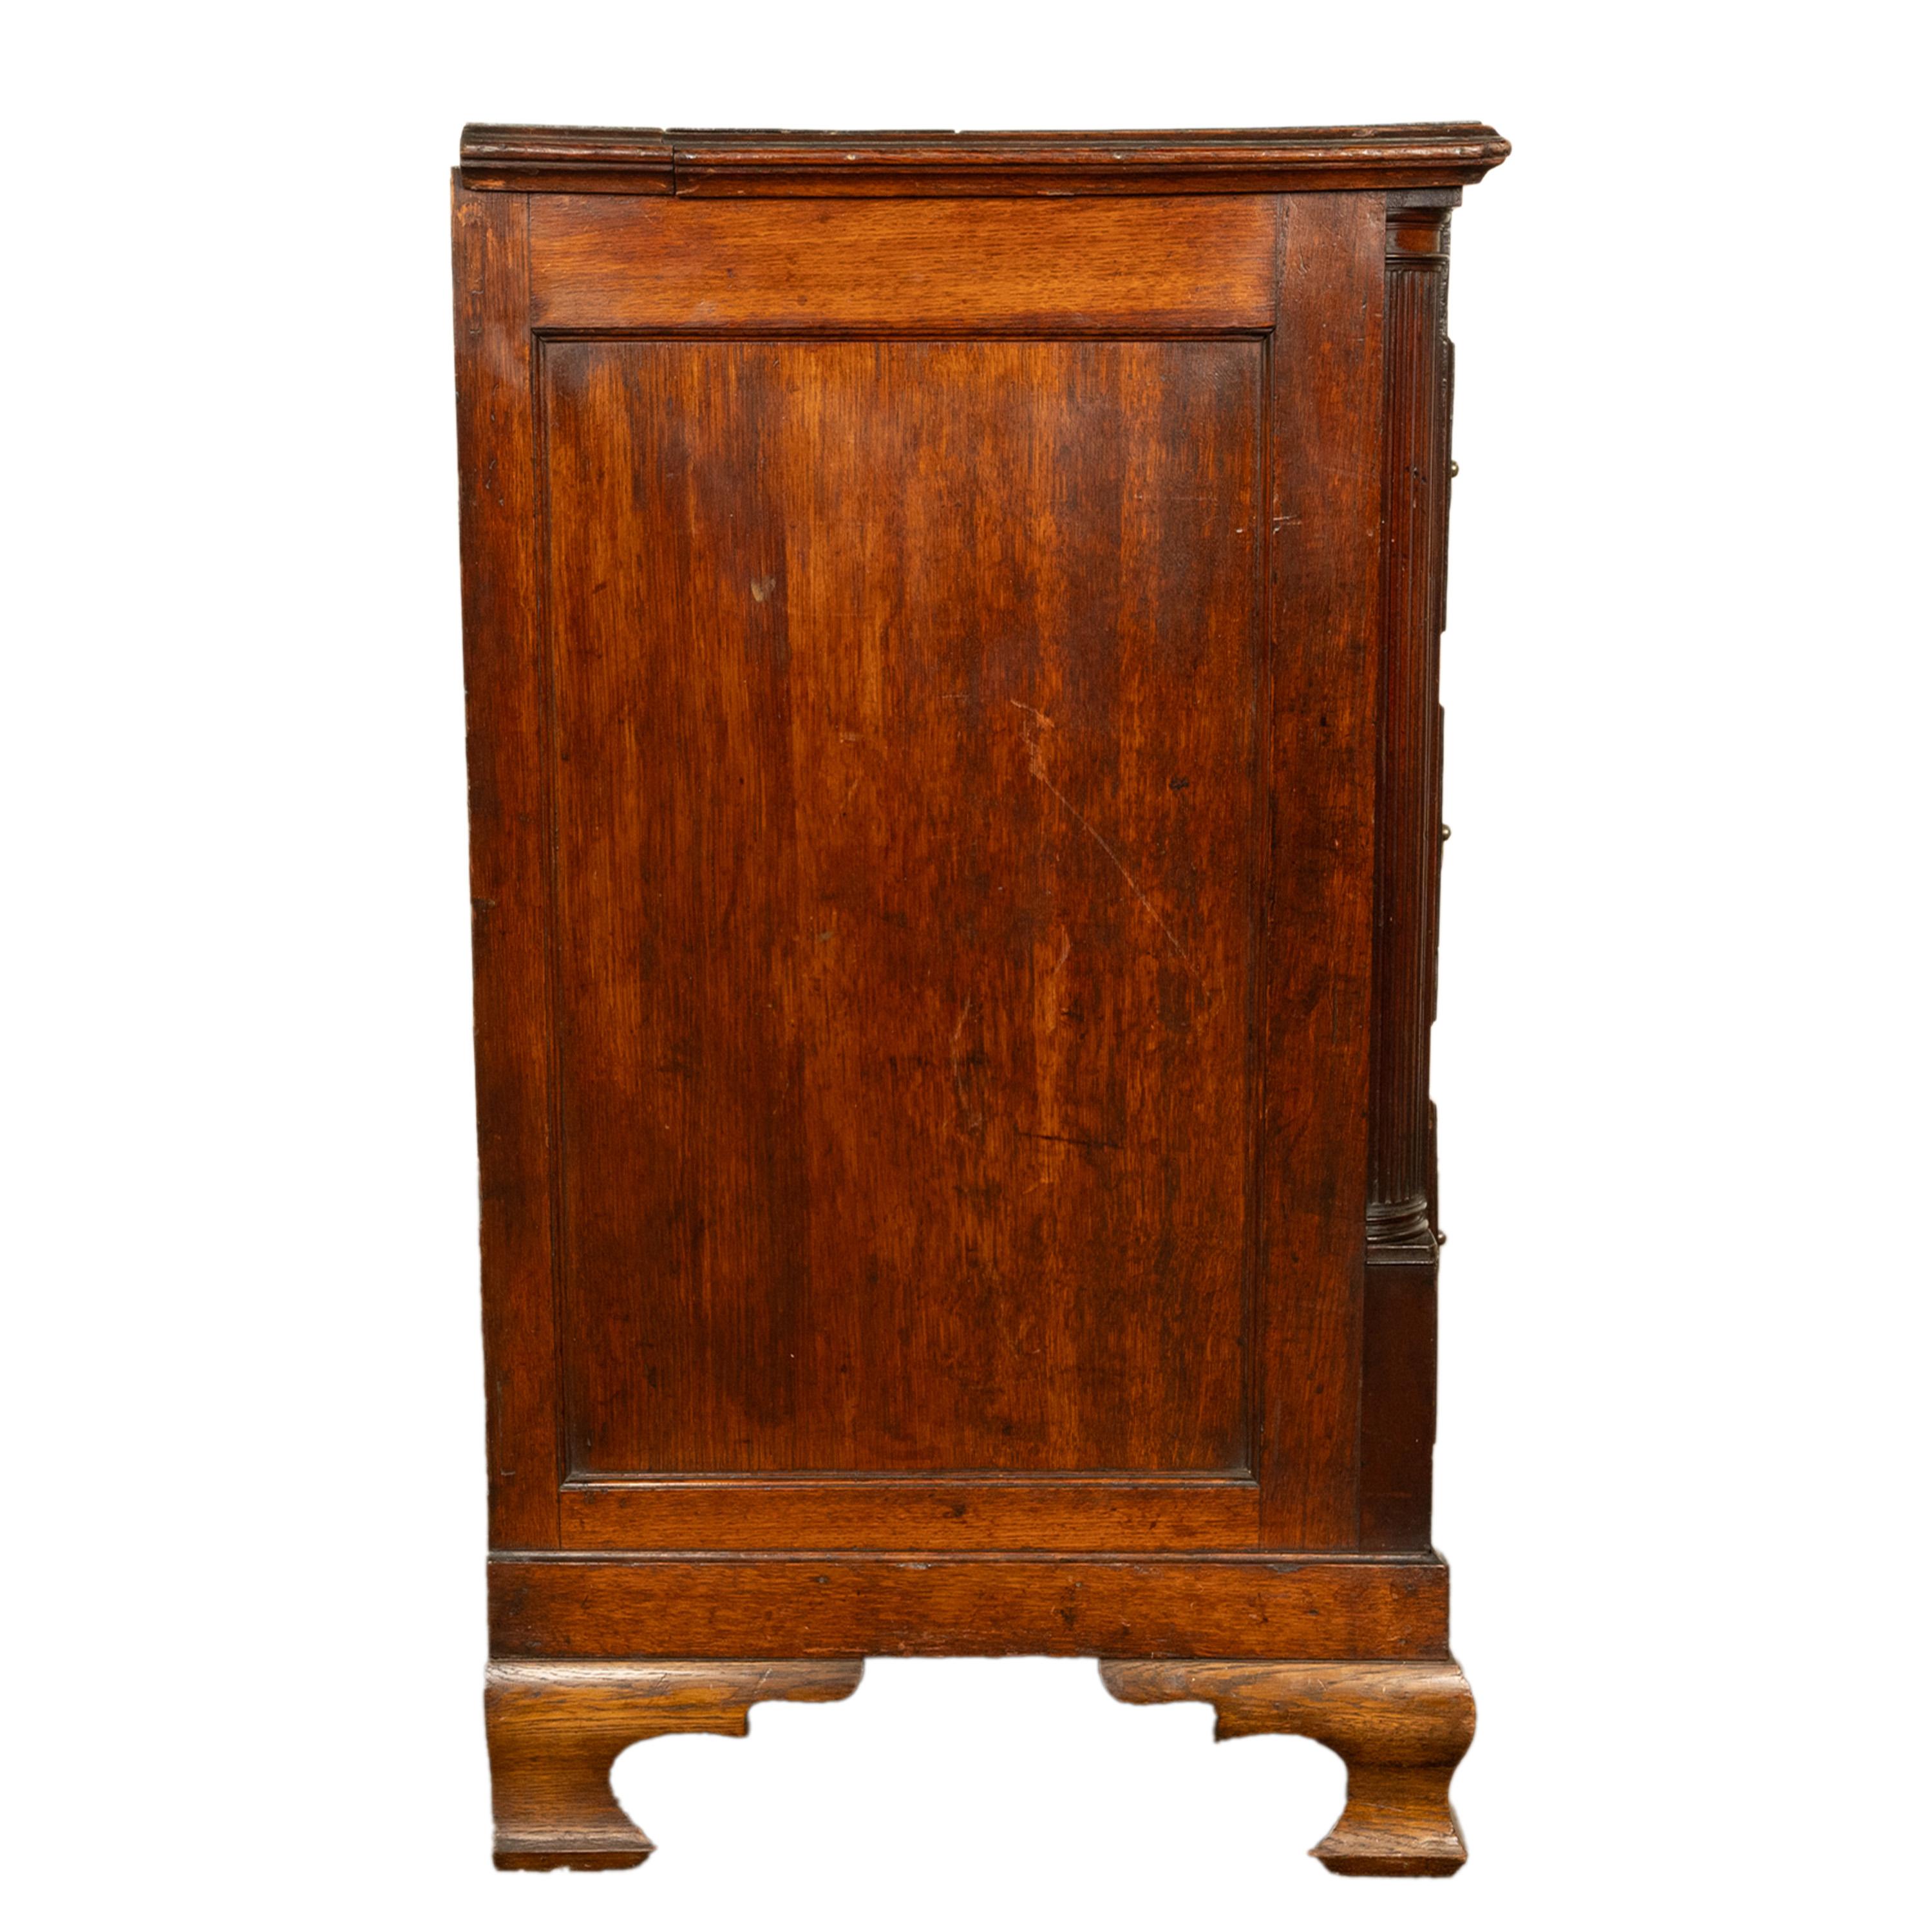 Antique 18th C Georgian Oak Mahogany Hinged Top Mule Chest Coffer Sideboard 1770 For Sale 7